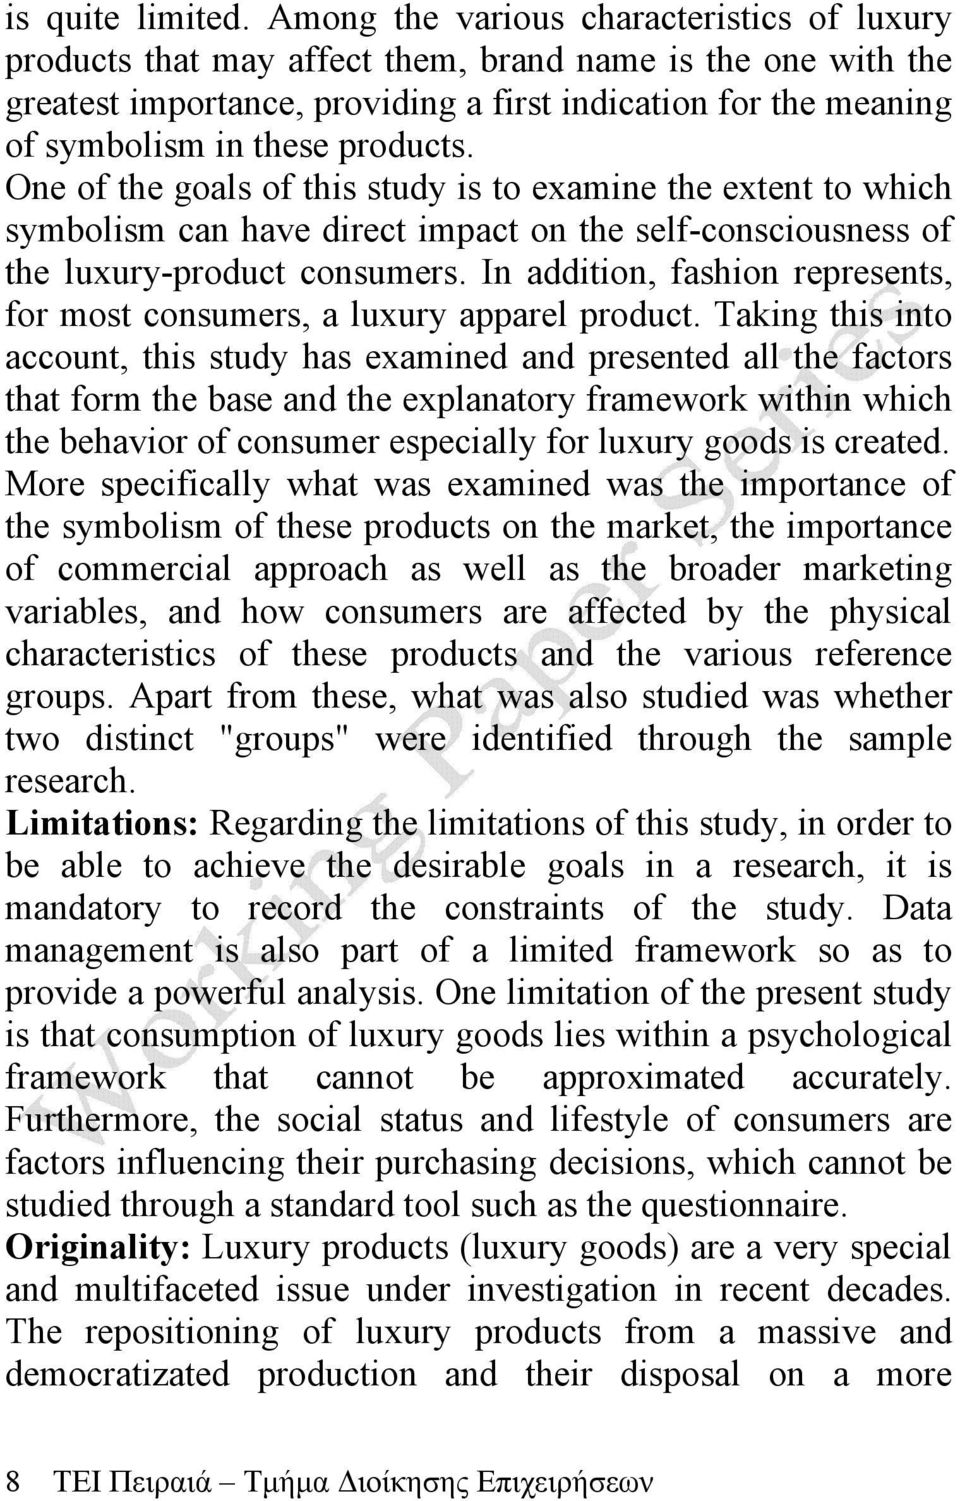 products. One of the goals of this study is to examine the extent to which symbolism can have direct impact on the self-consciousness of the luxury-product consumers.